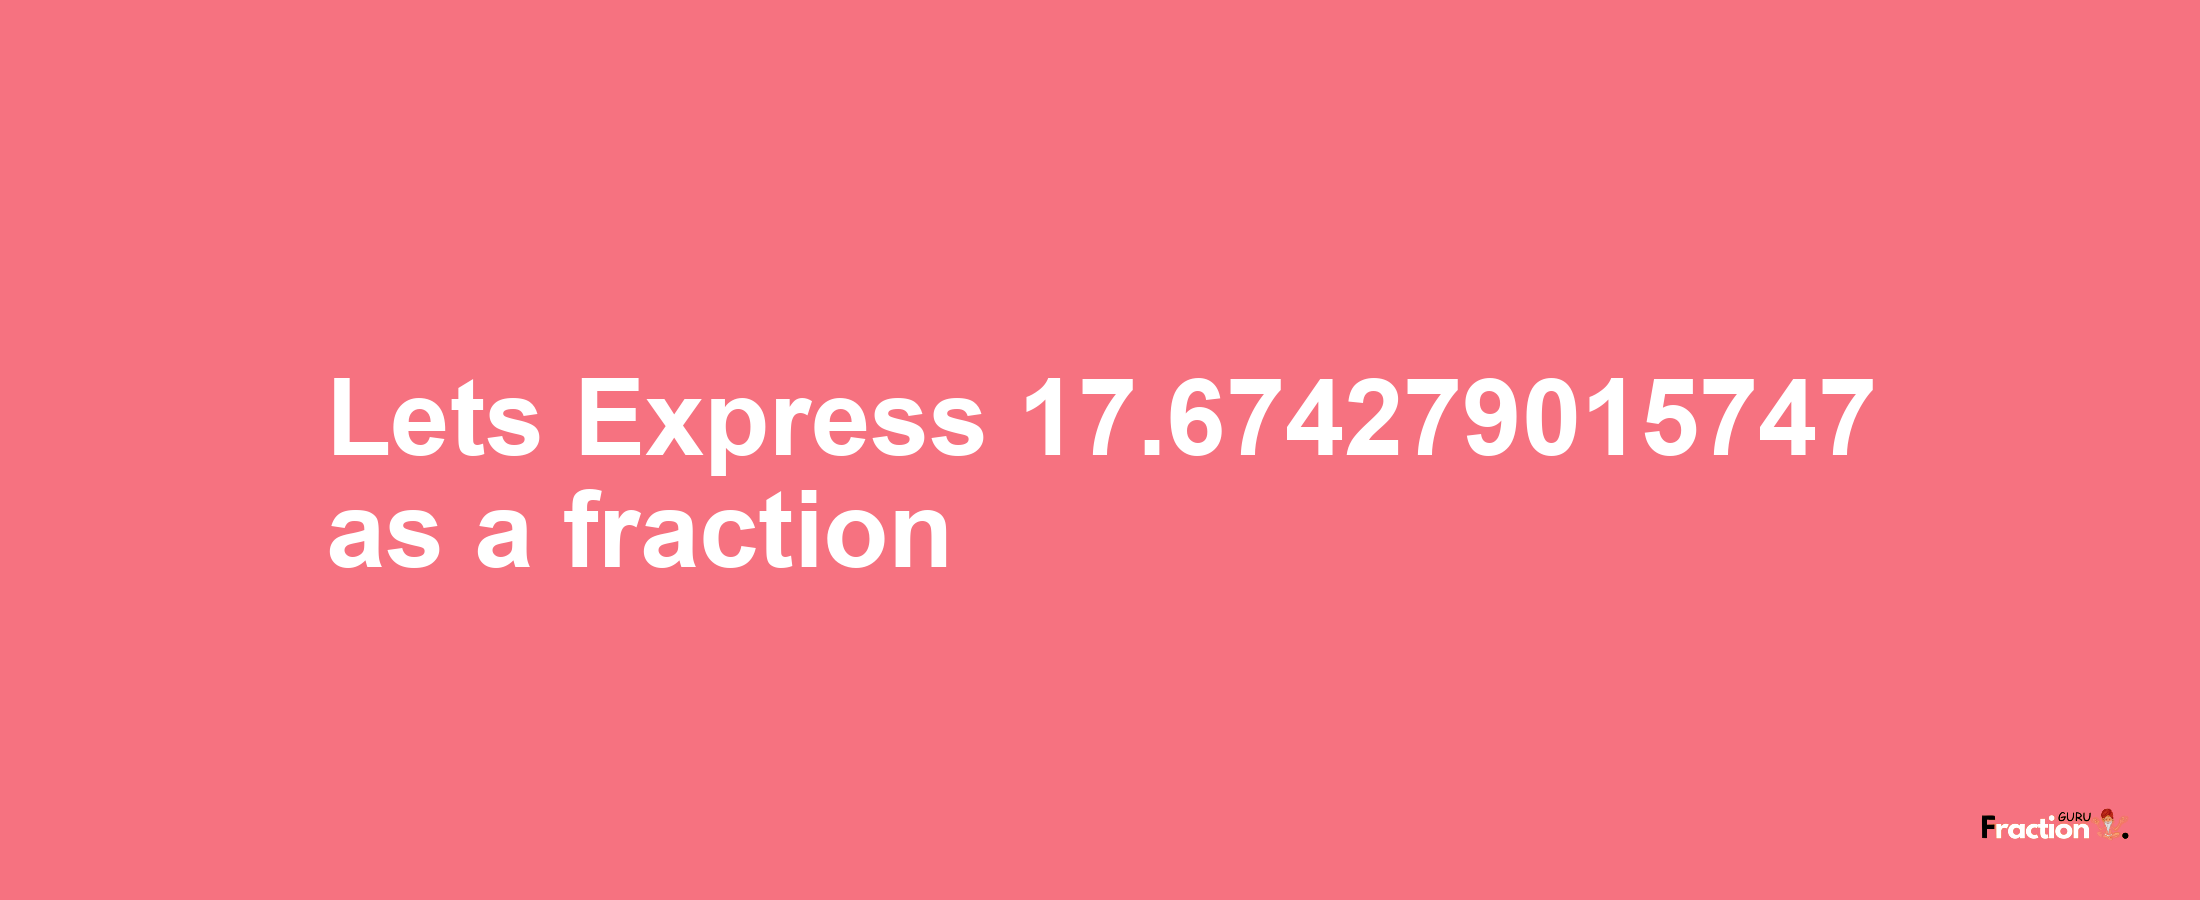 Lets Express 17.674279015747 as afraction